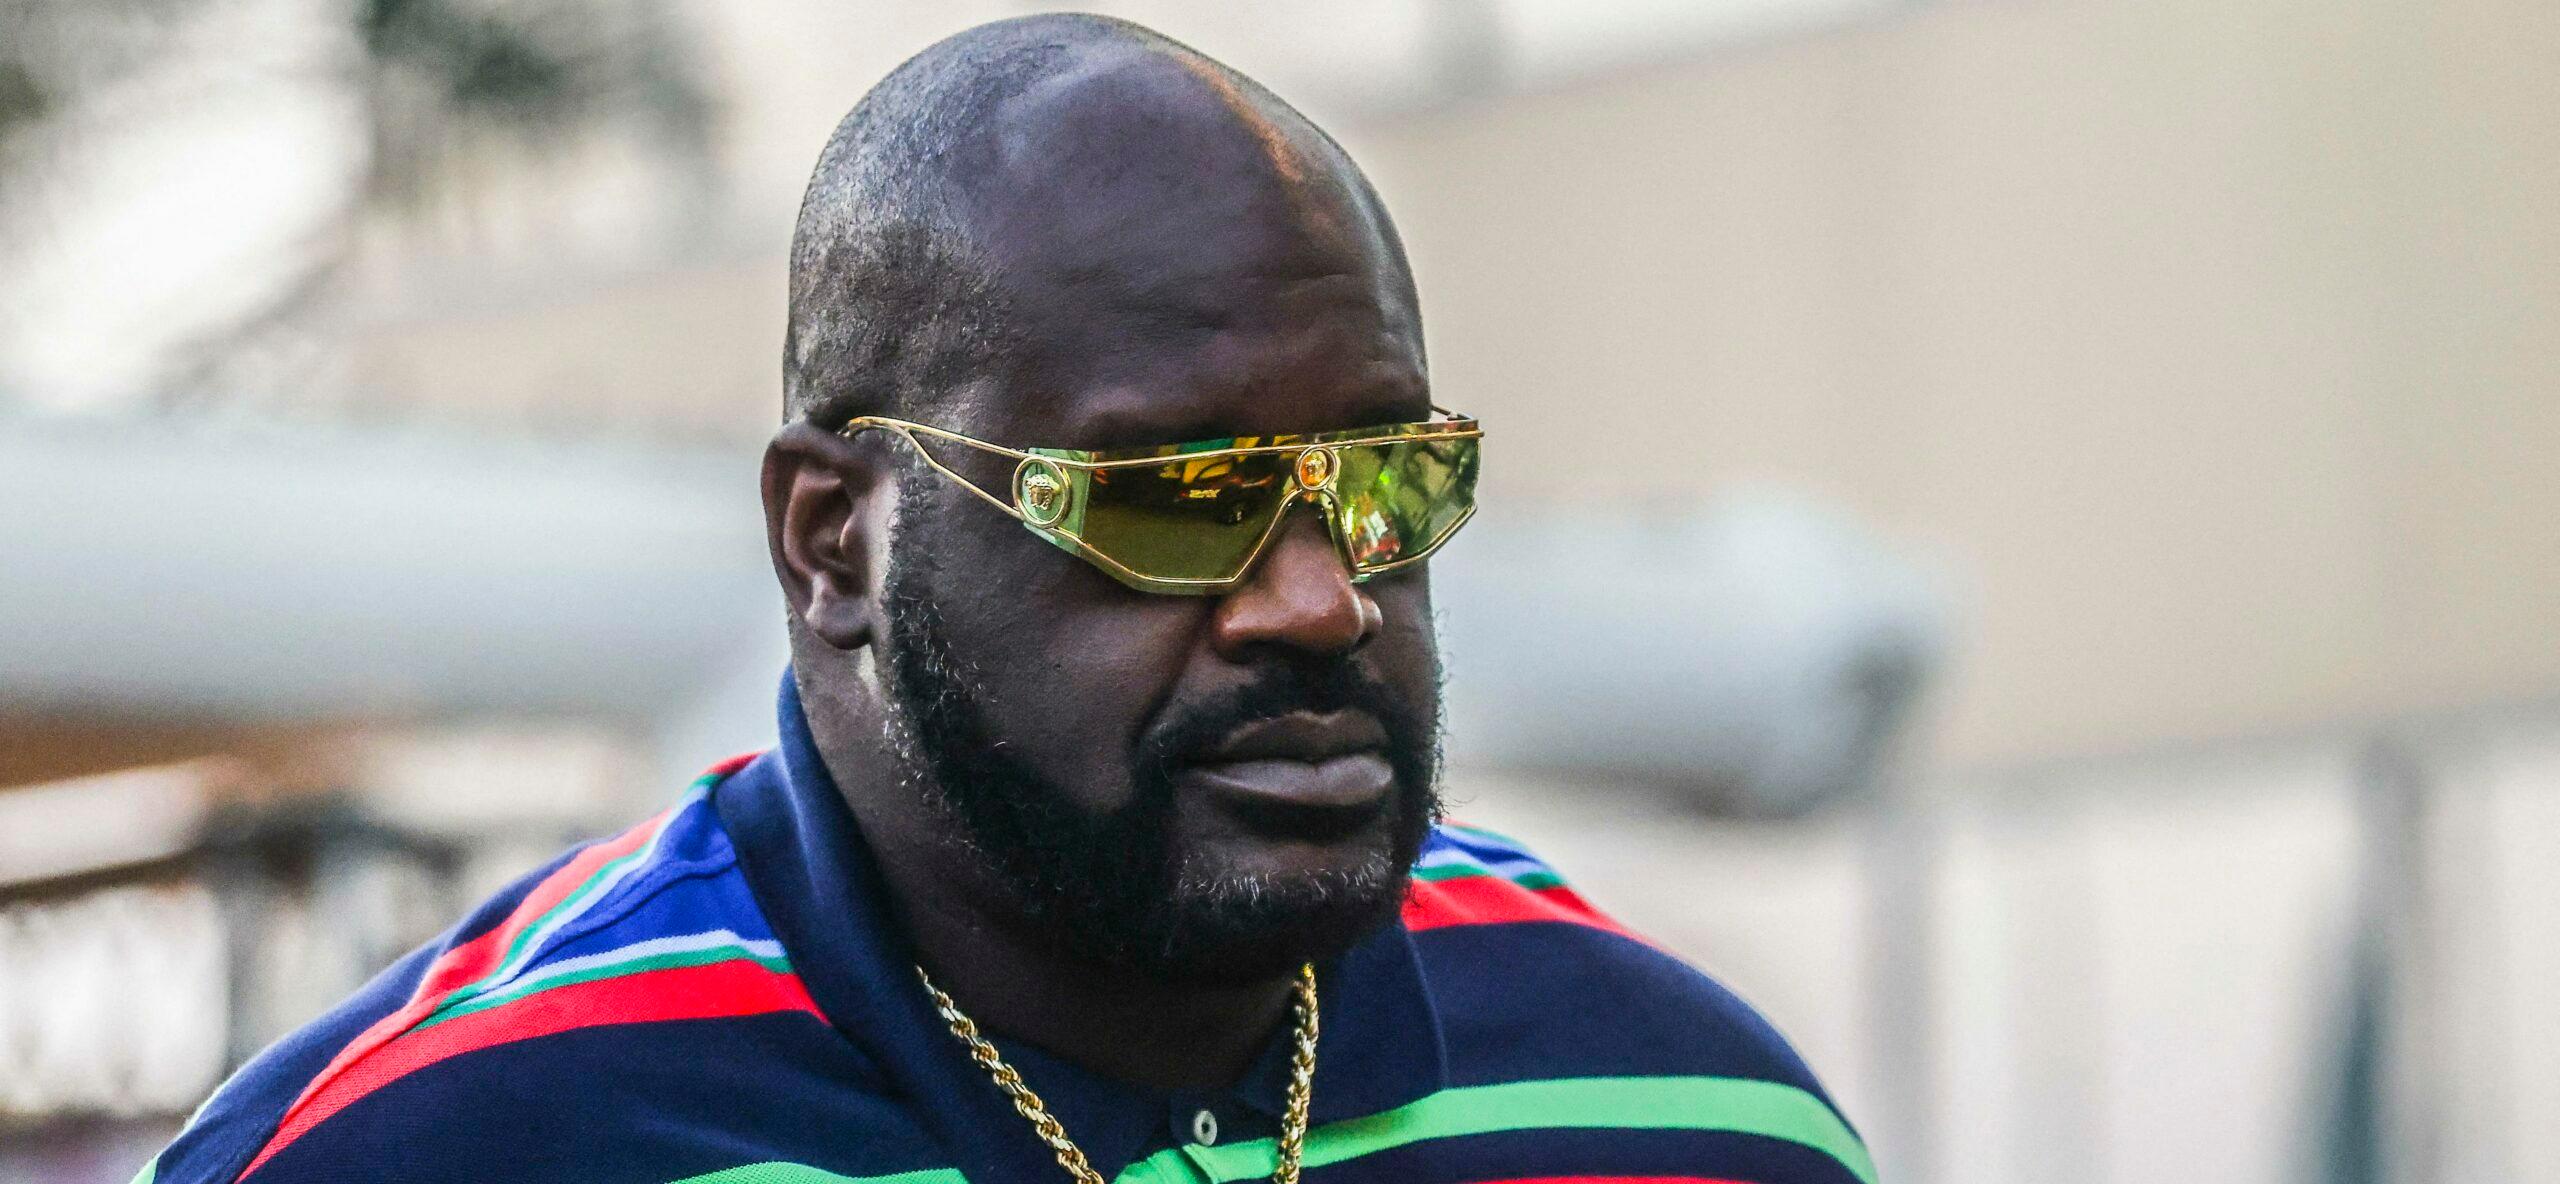 Shaquille O’Neal Shared Photo From Hospital Bed Joking That He Had “BBL Work Done”